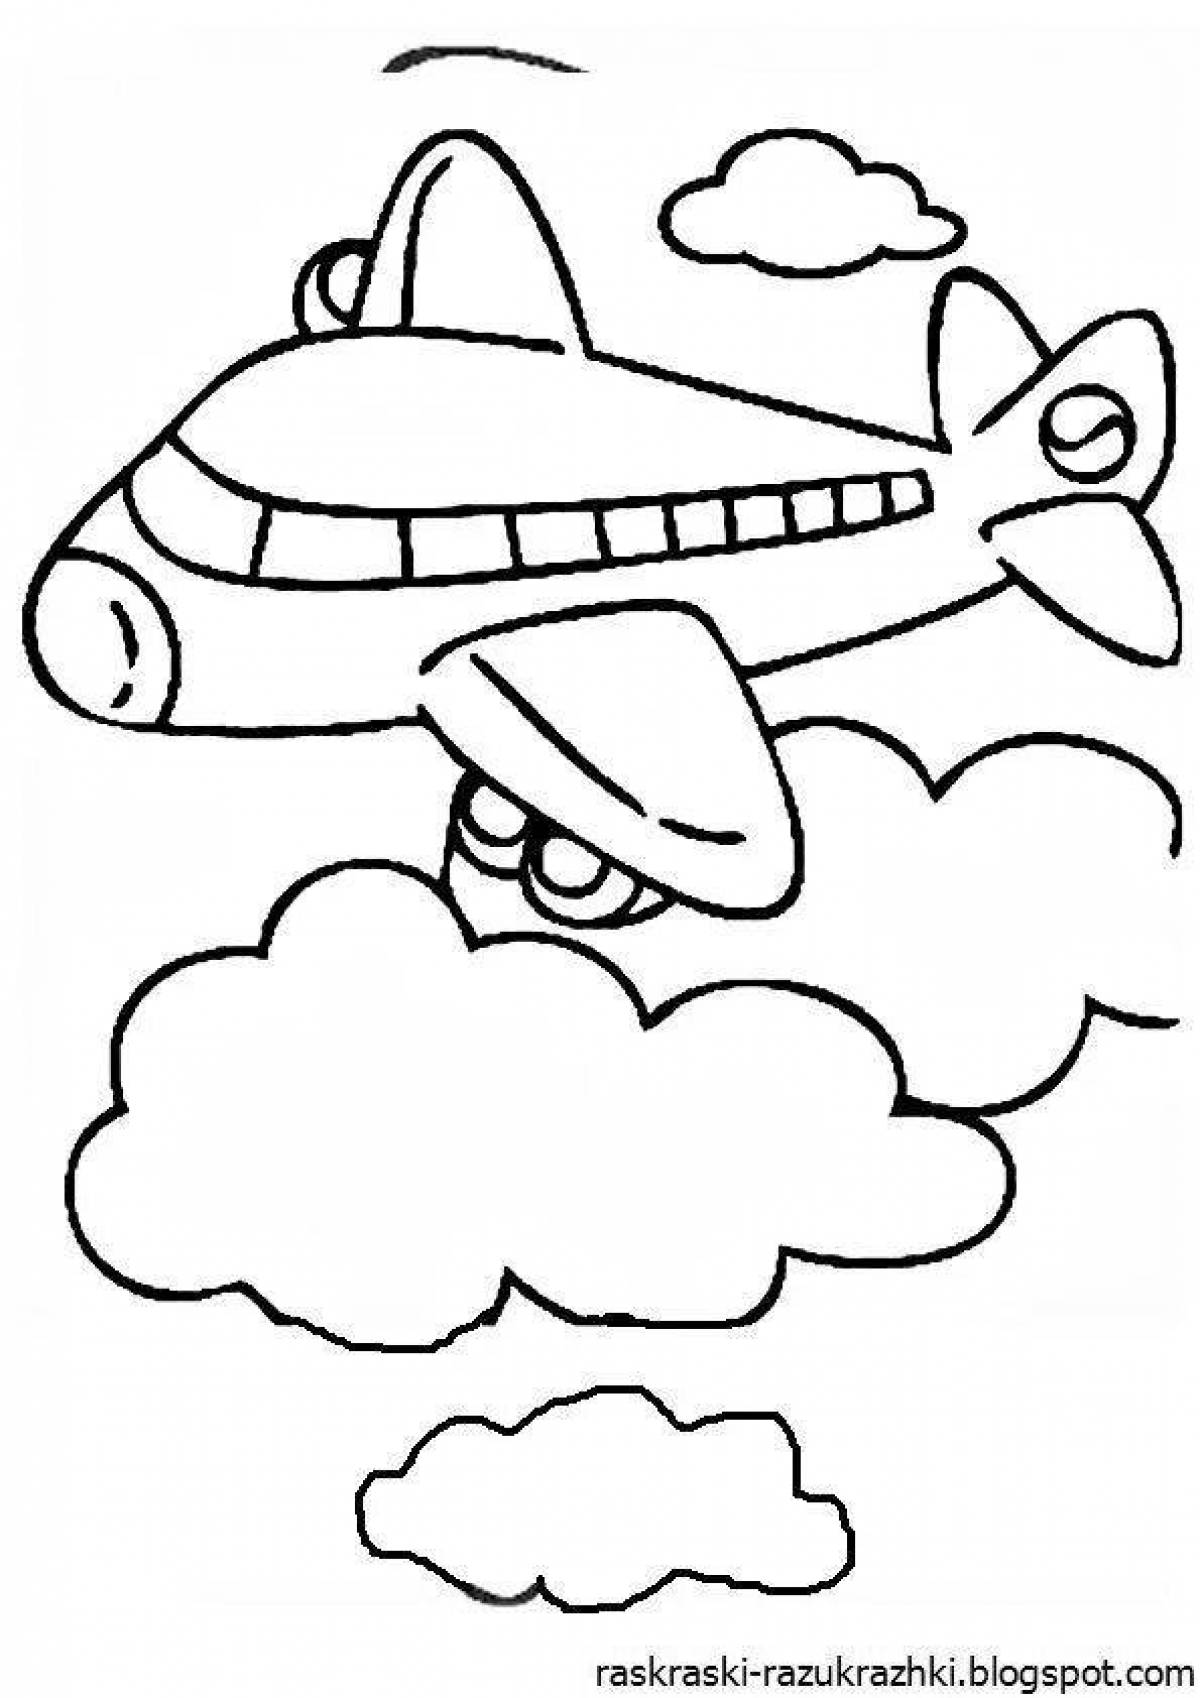 Color-frenzy coloring page for senior group of kindergarten